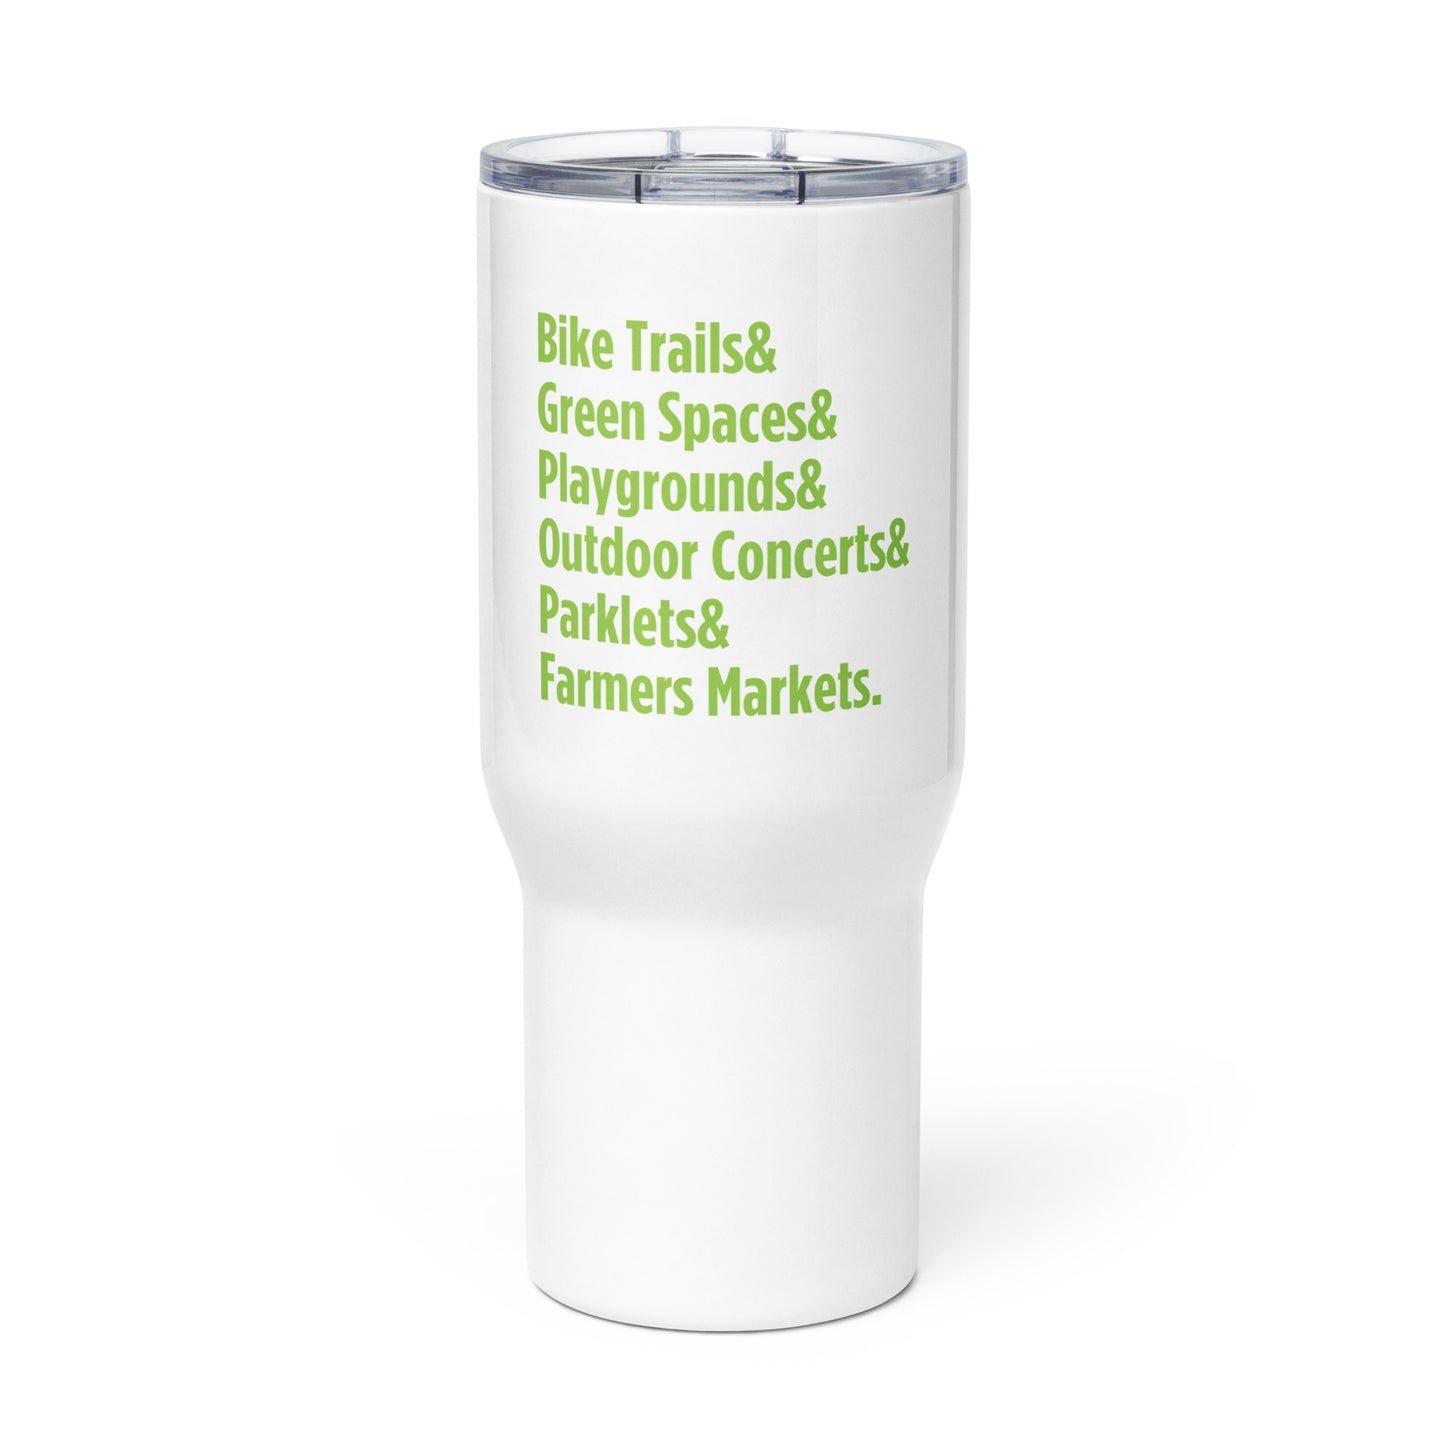 "Only on Main Street" (Greenspaces) Travel Mug with Handle